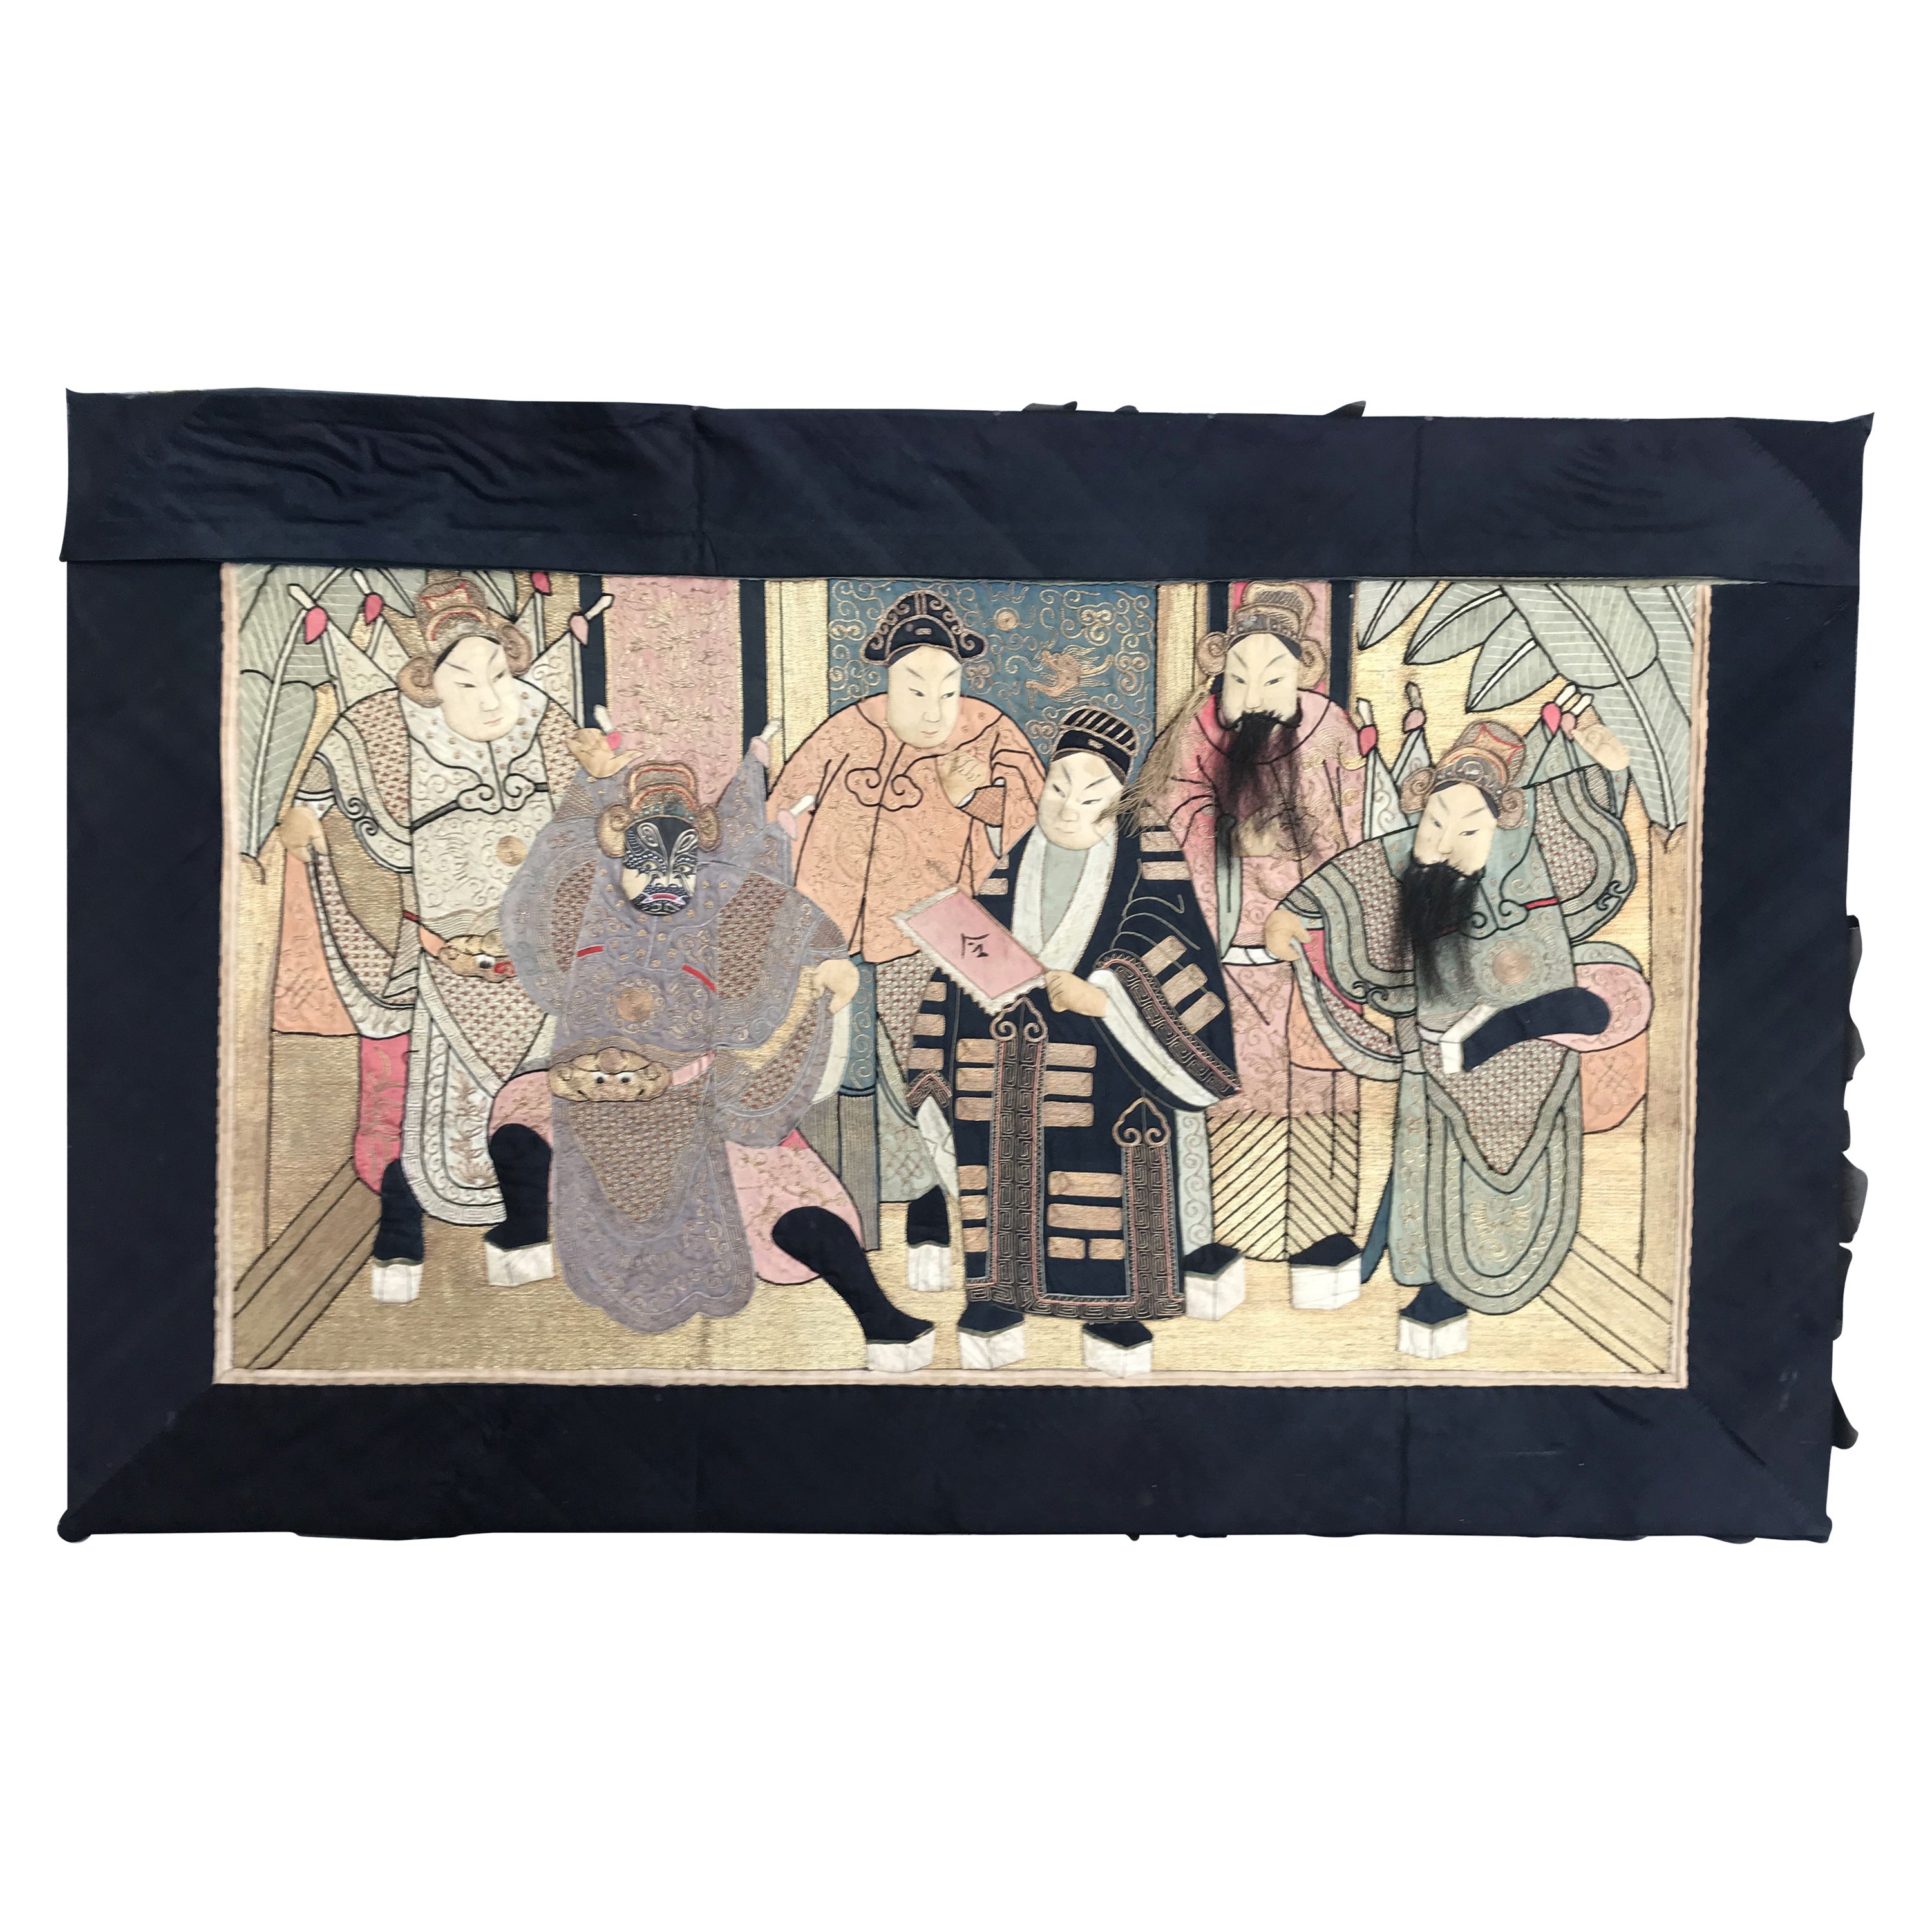 Bobyrug’s Wonderful Antique Chinese Pictural Embroidery with Silk and Metal